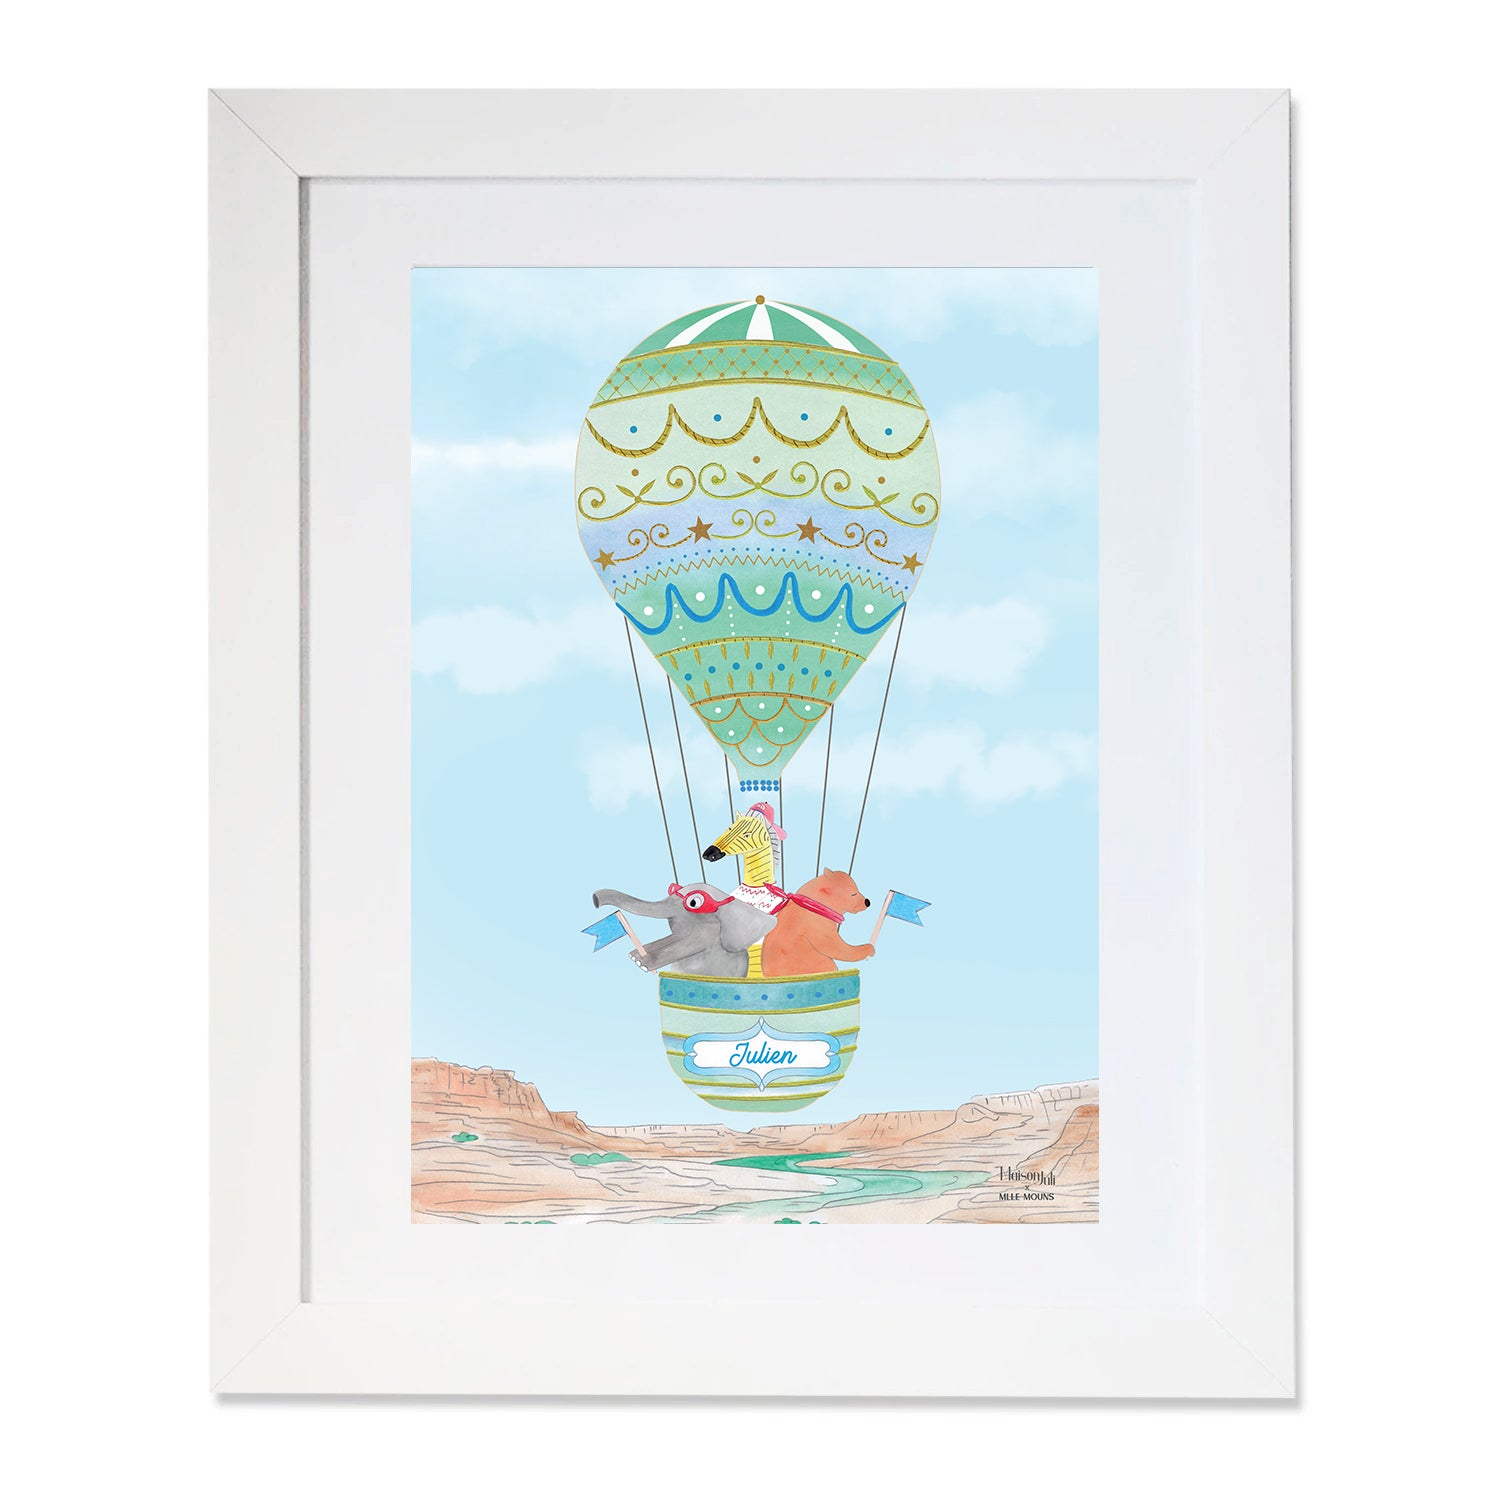 The Personalised Hot Air Balloon of the Grand Canyon Artwork for boys